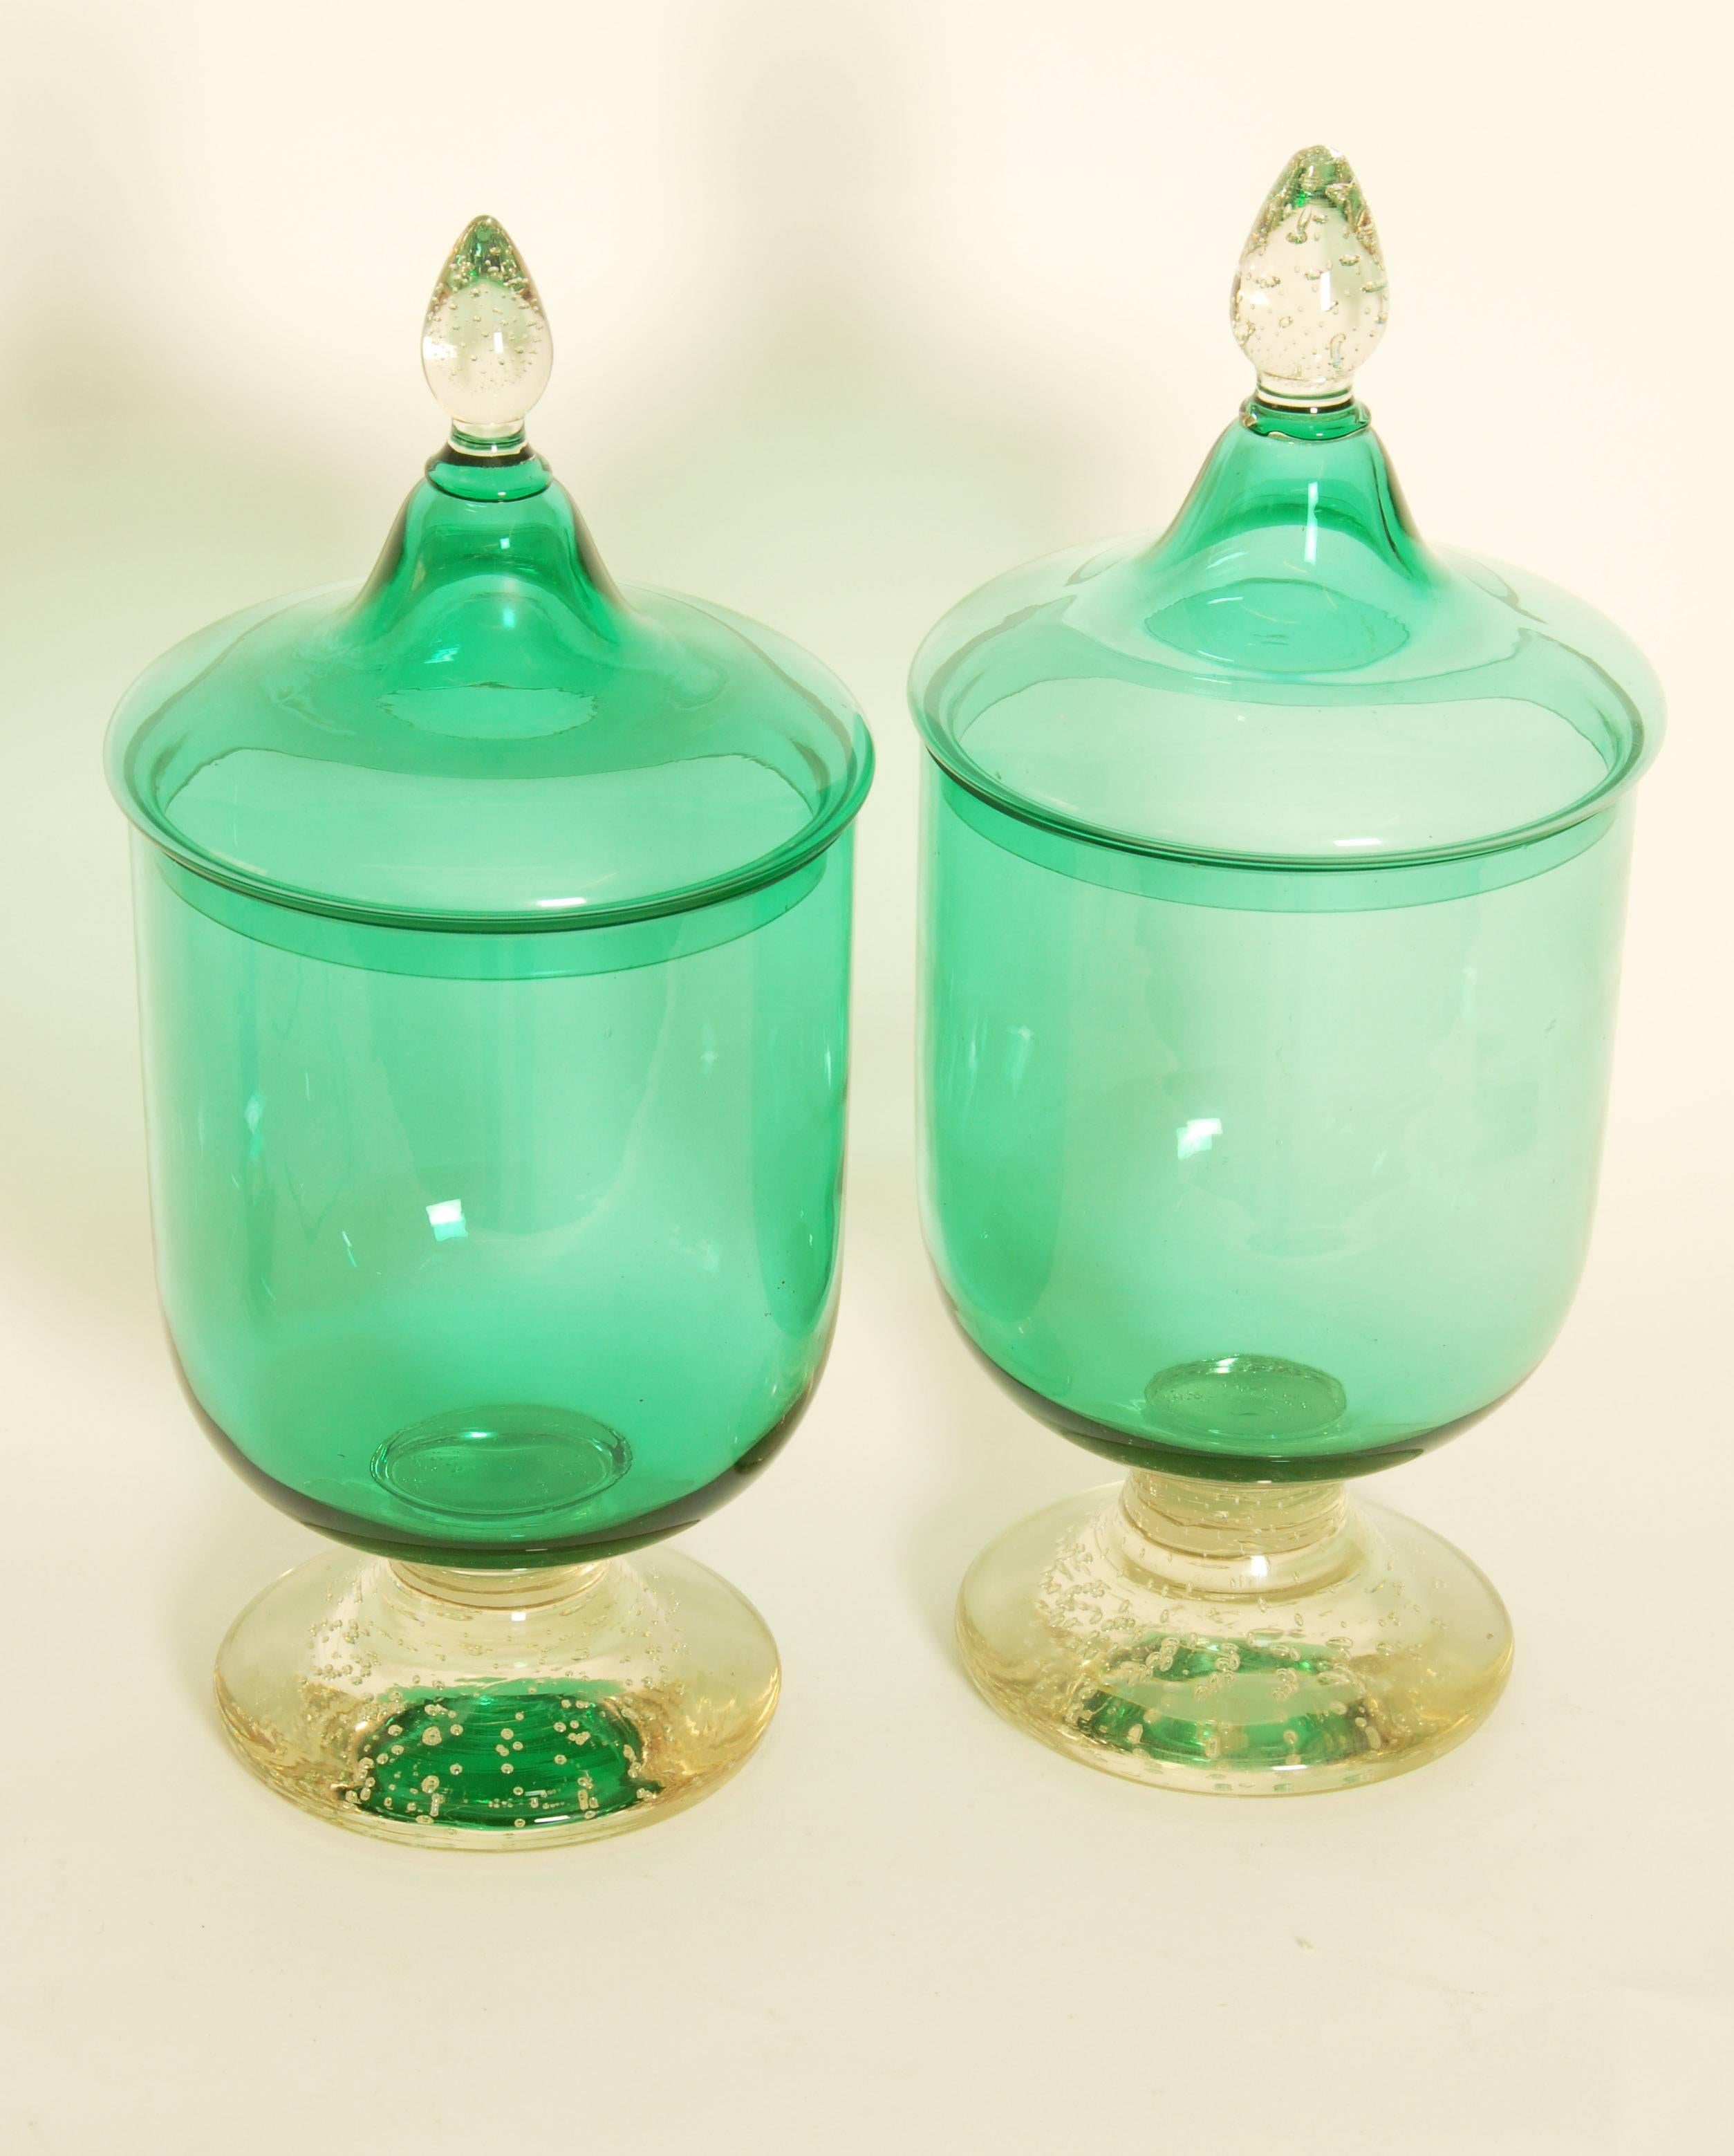 20th Century Pair of Murano Glass Lidded Urns or Vases For Sale